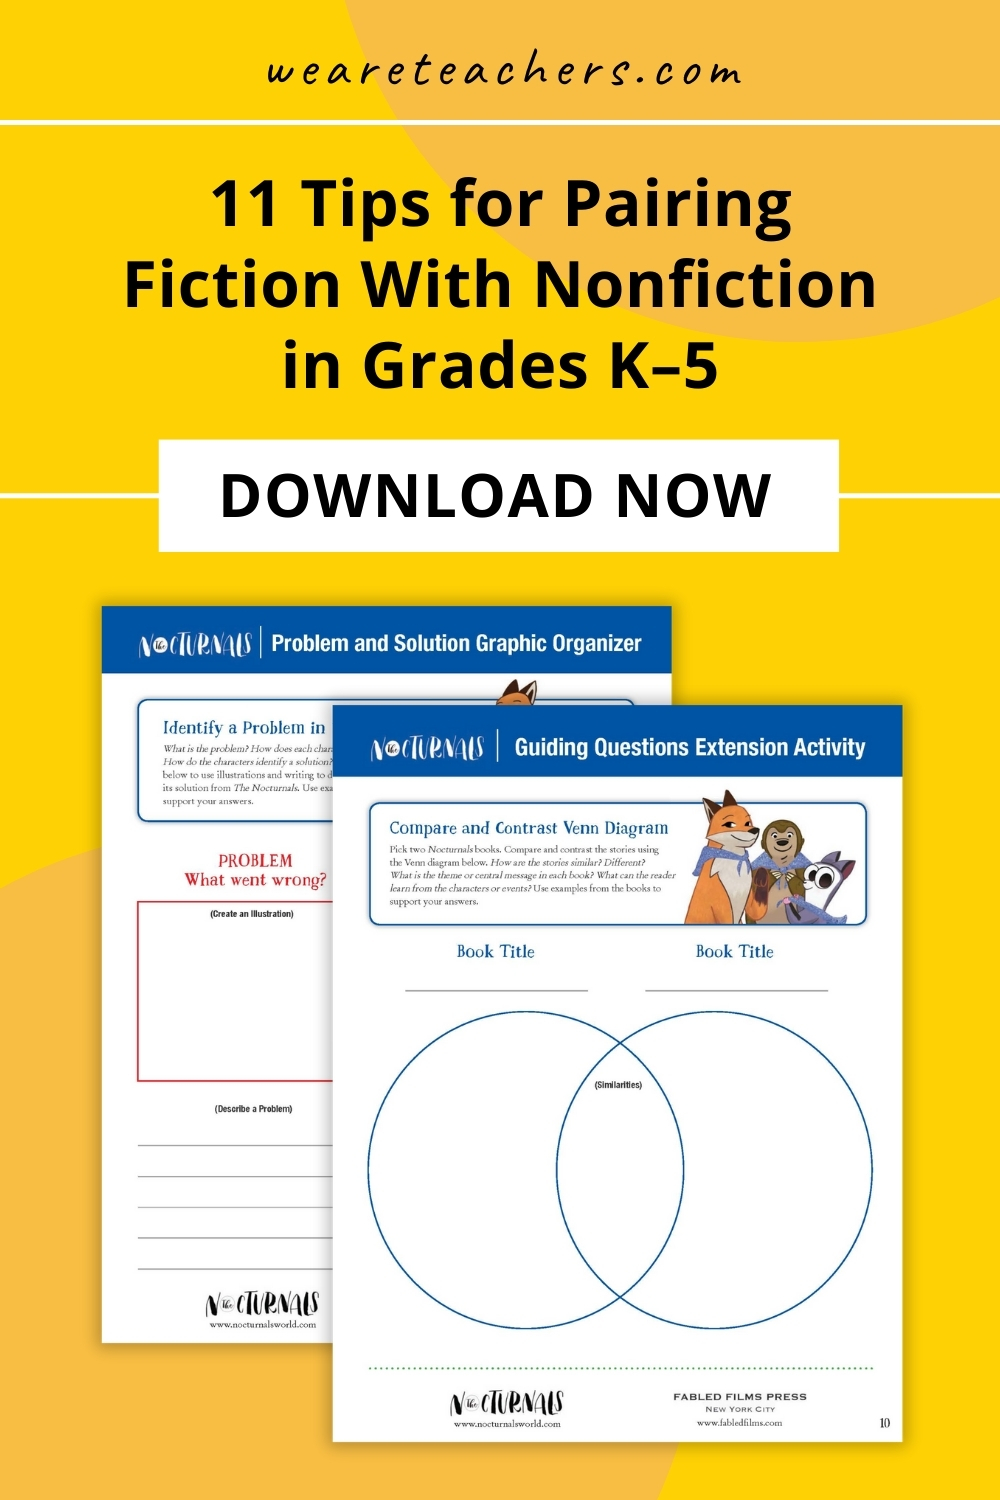 Pairing fiction with nonfiction is a fantastic way to engage different kinds of learners in content with common themes. Grab ideas here!